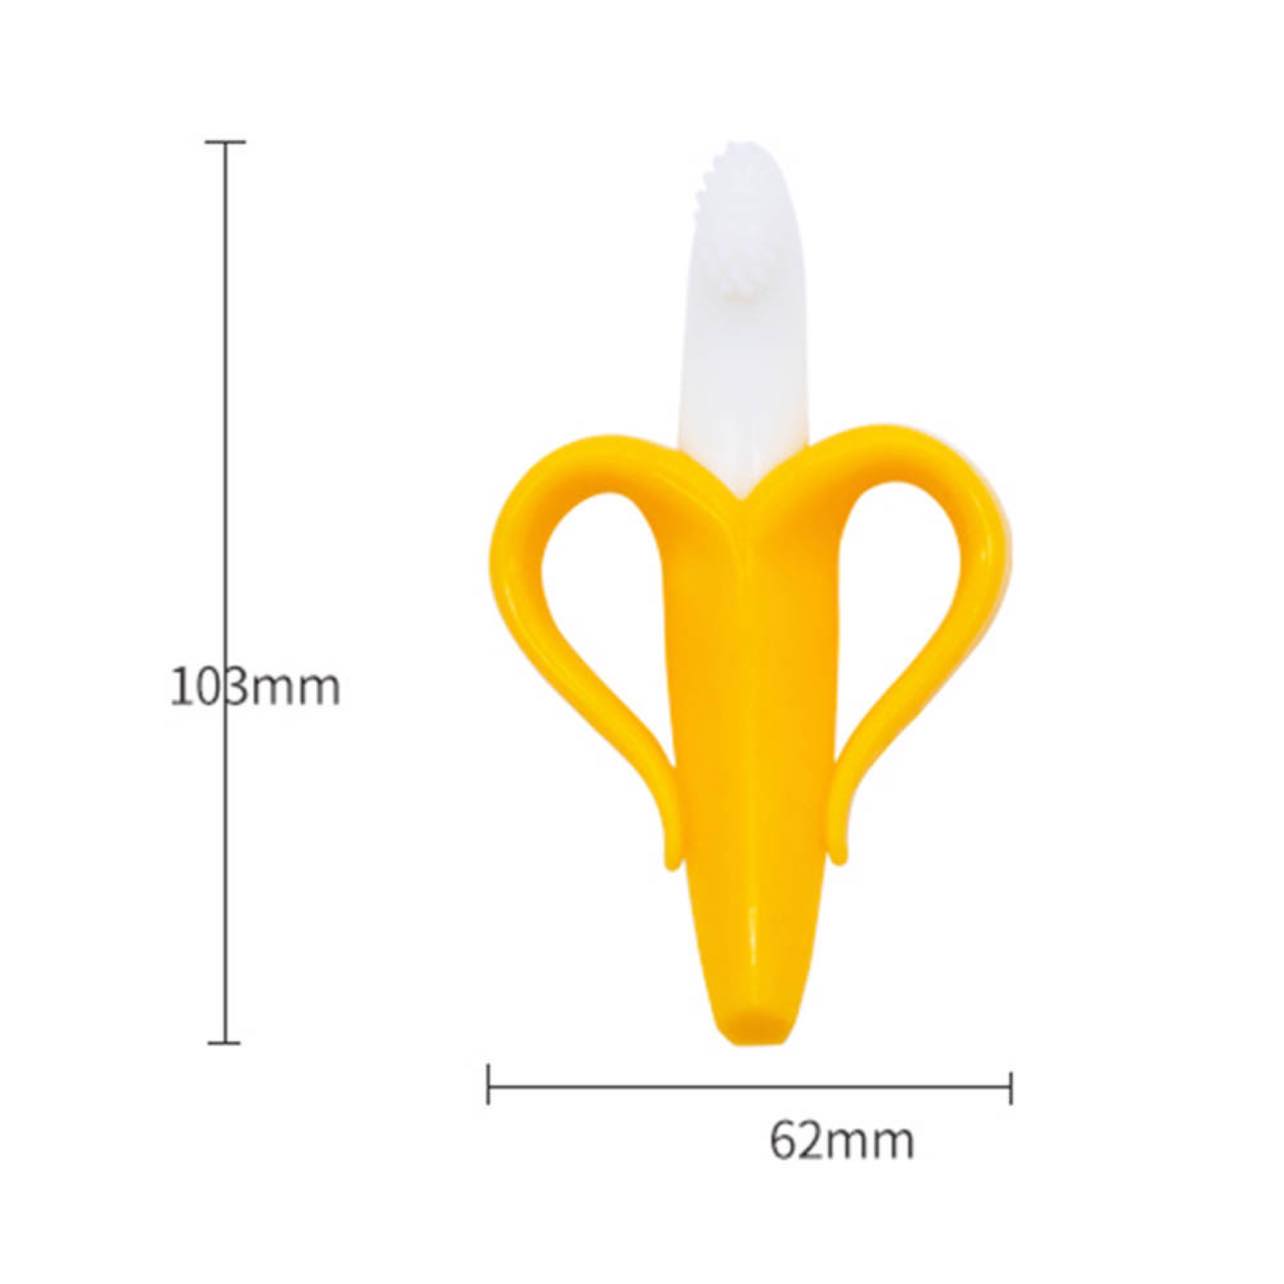 Banana shaped silicone molar teether with handles perfect for teething babies